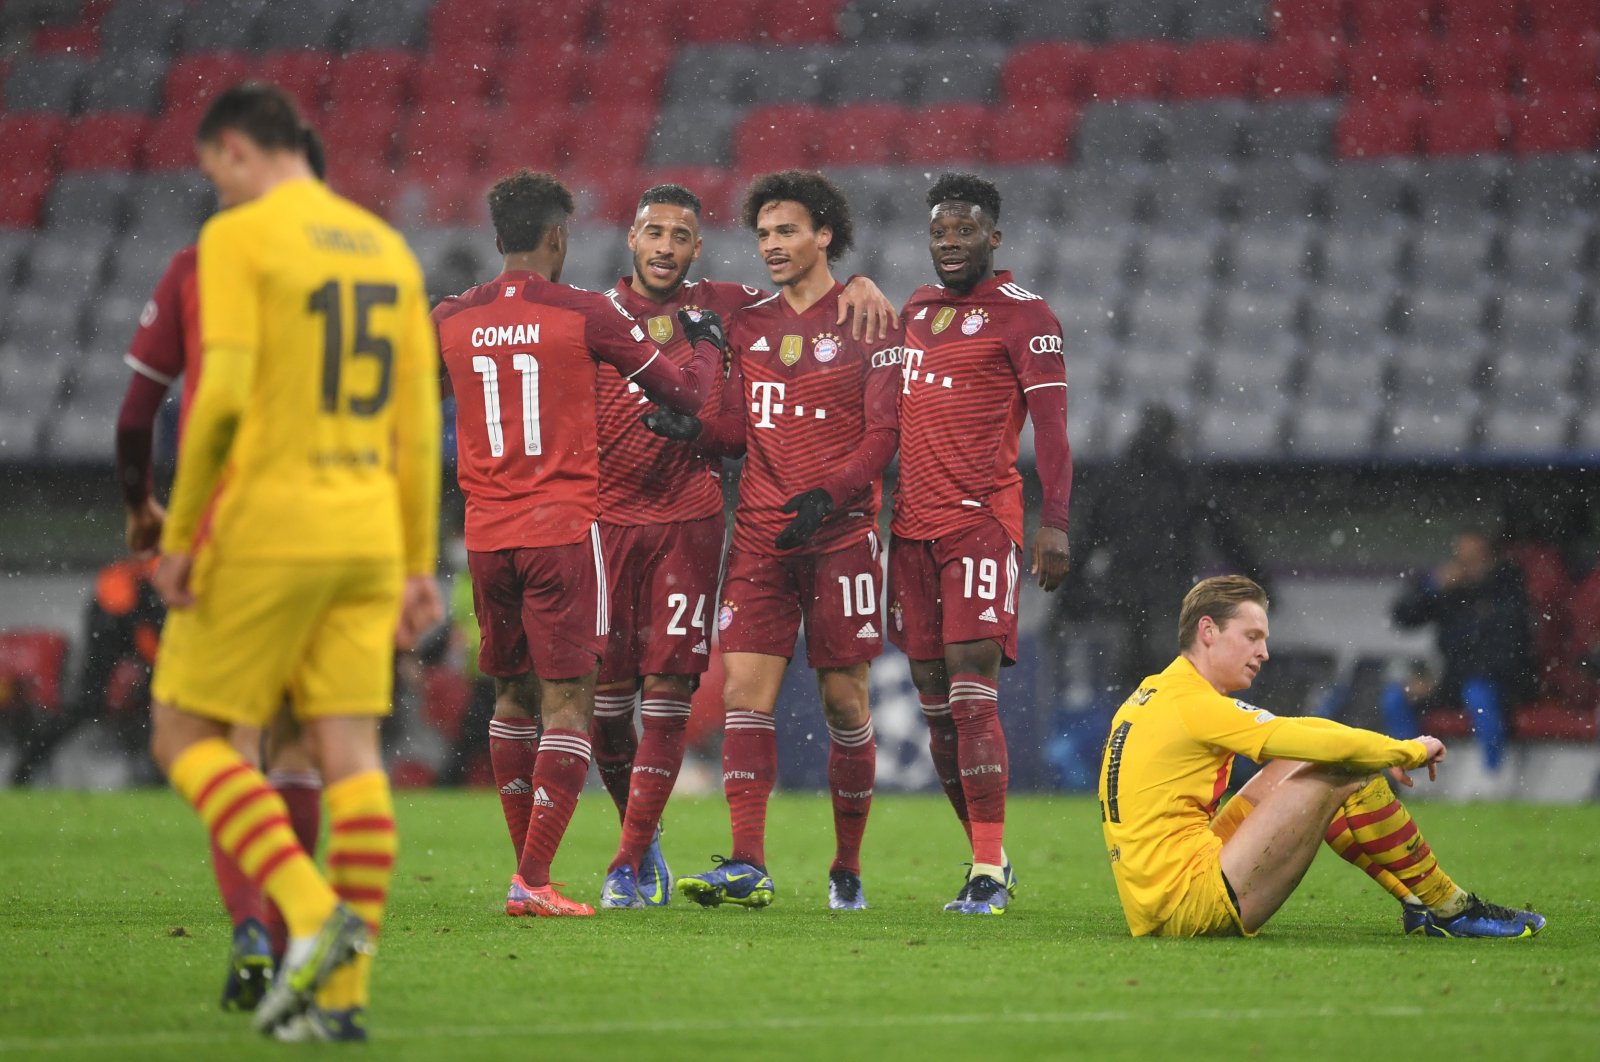 Barcelona players, in yellow, look dejected as Bayern Munich players celebrate after their Champions League match at the Allianz Arena in Munich, Germany, Dec. 8, 2021. (Reuters Photo)